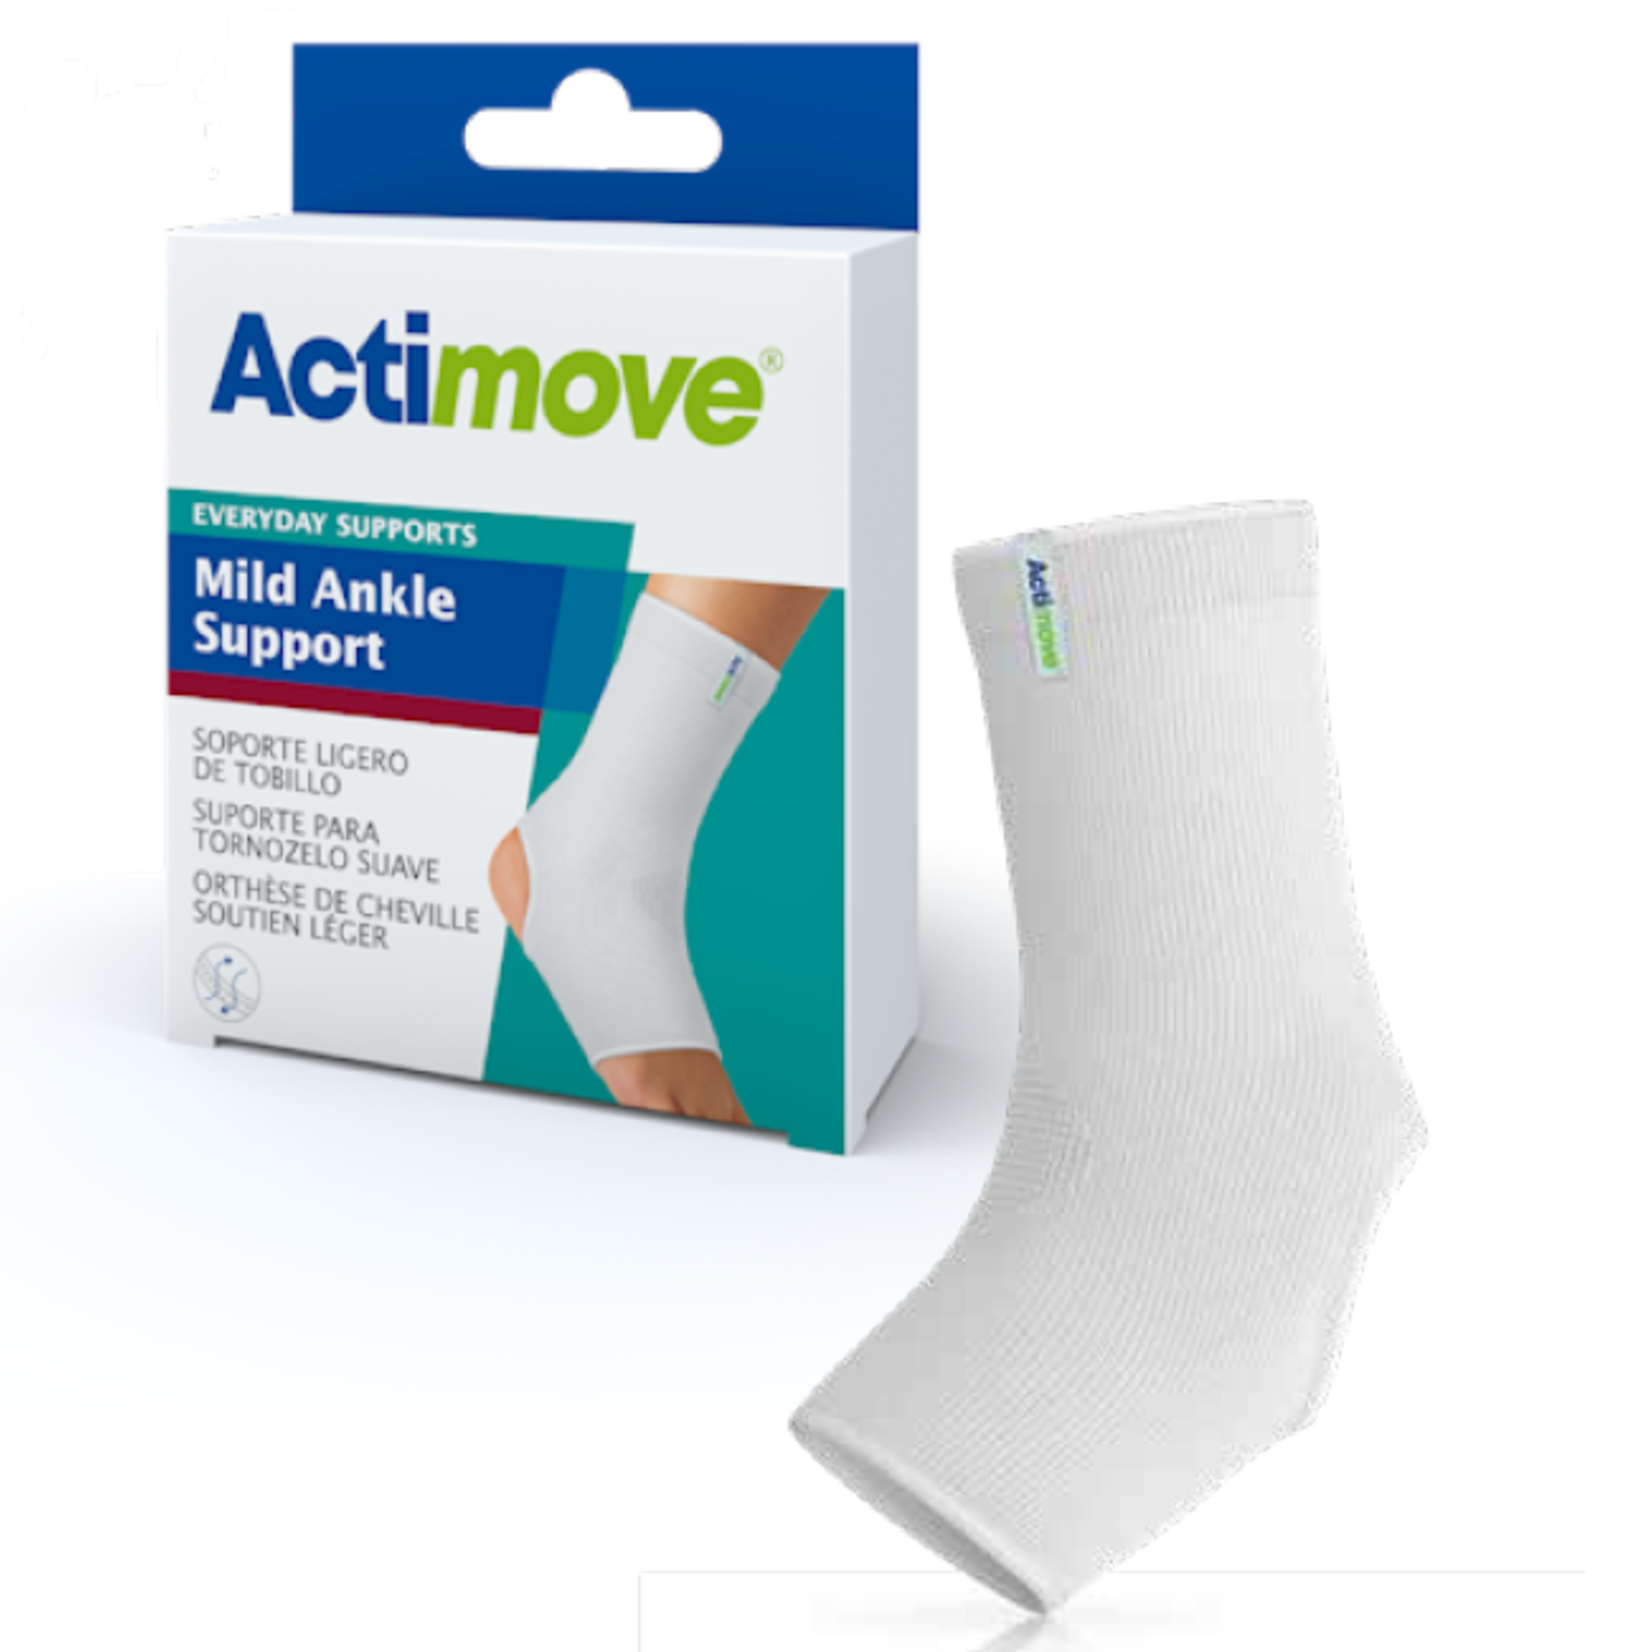 ActiMove Mild Ankle Support